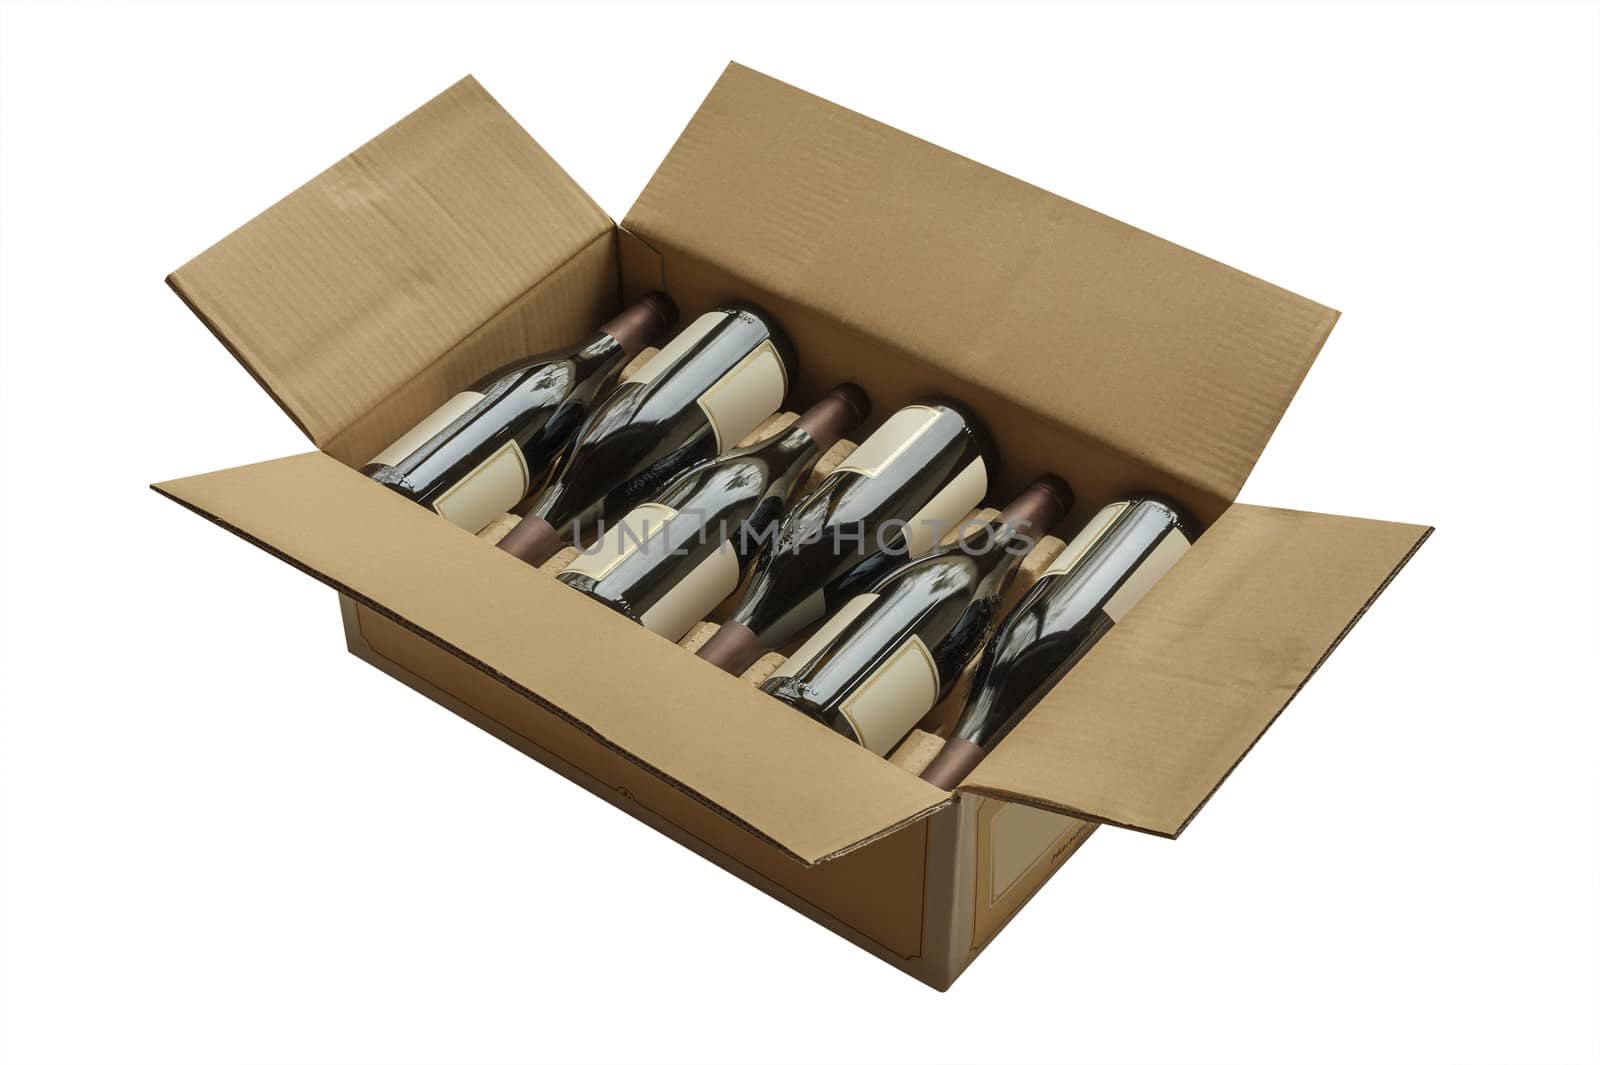 Wine bottles now shipped in cardboard boxes